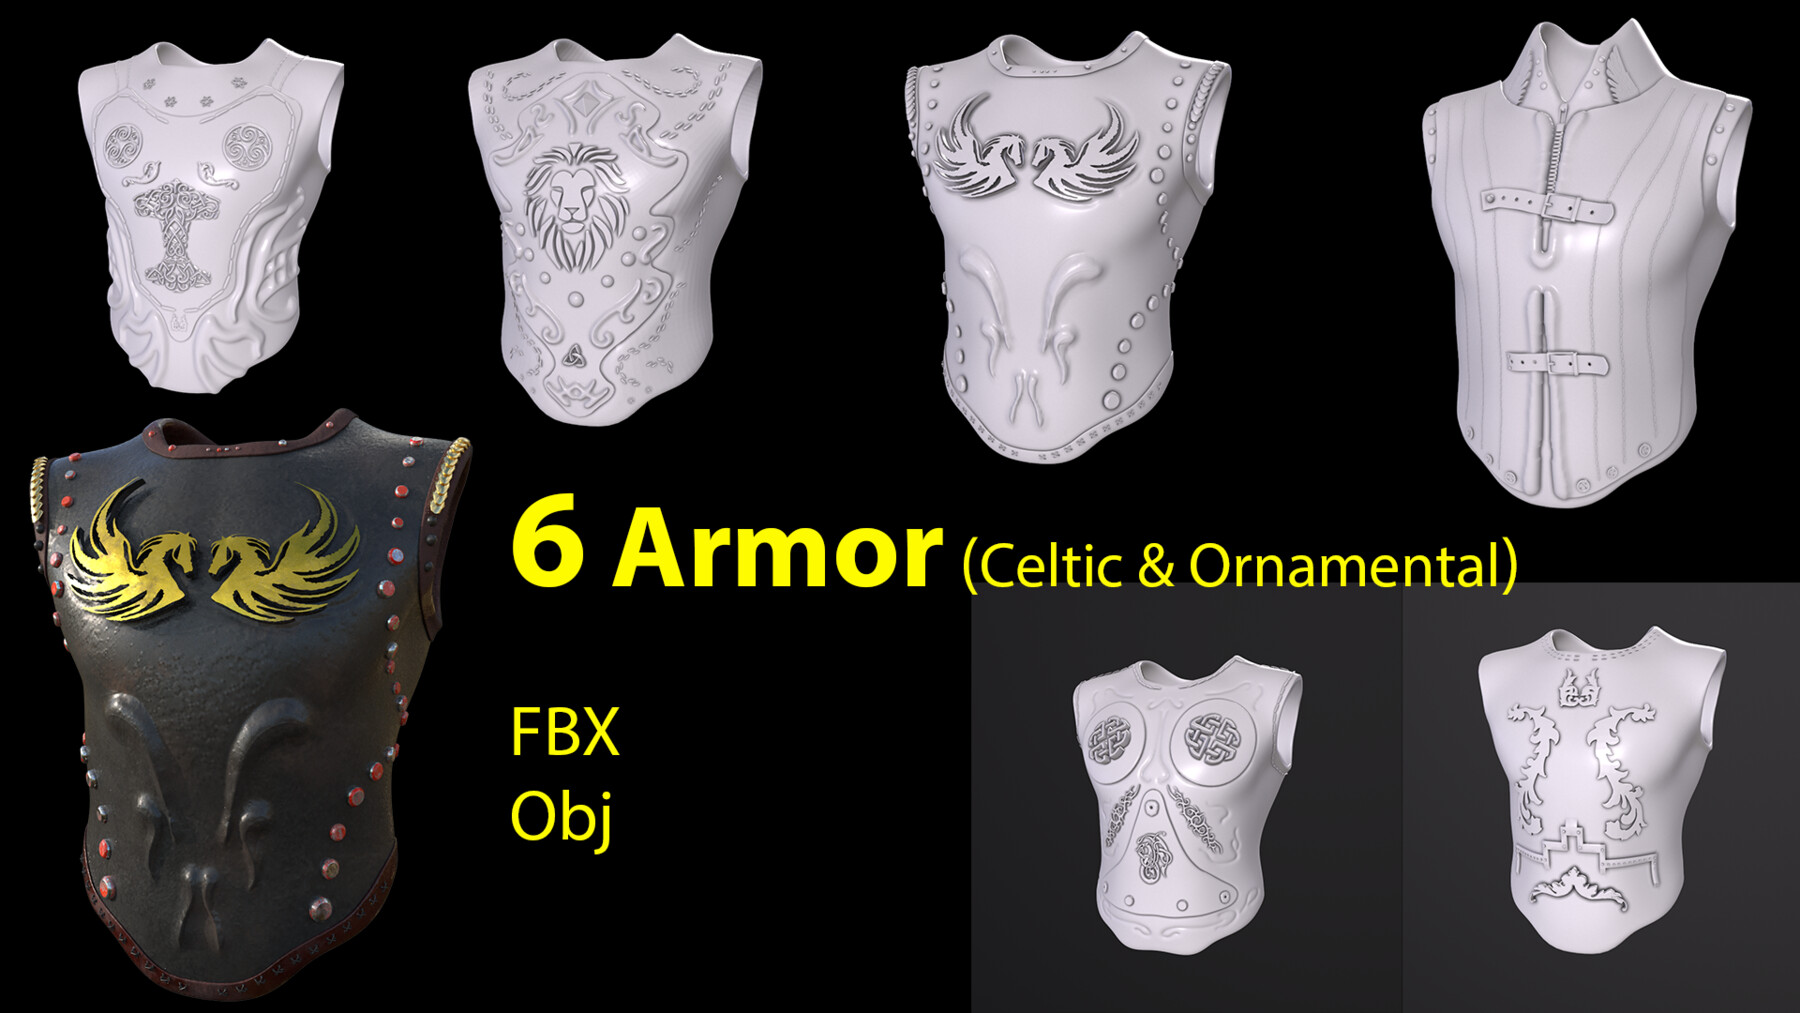 378 Mold Armor Images, Stock Photos, 3D objects, & Vectors